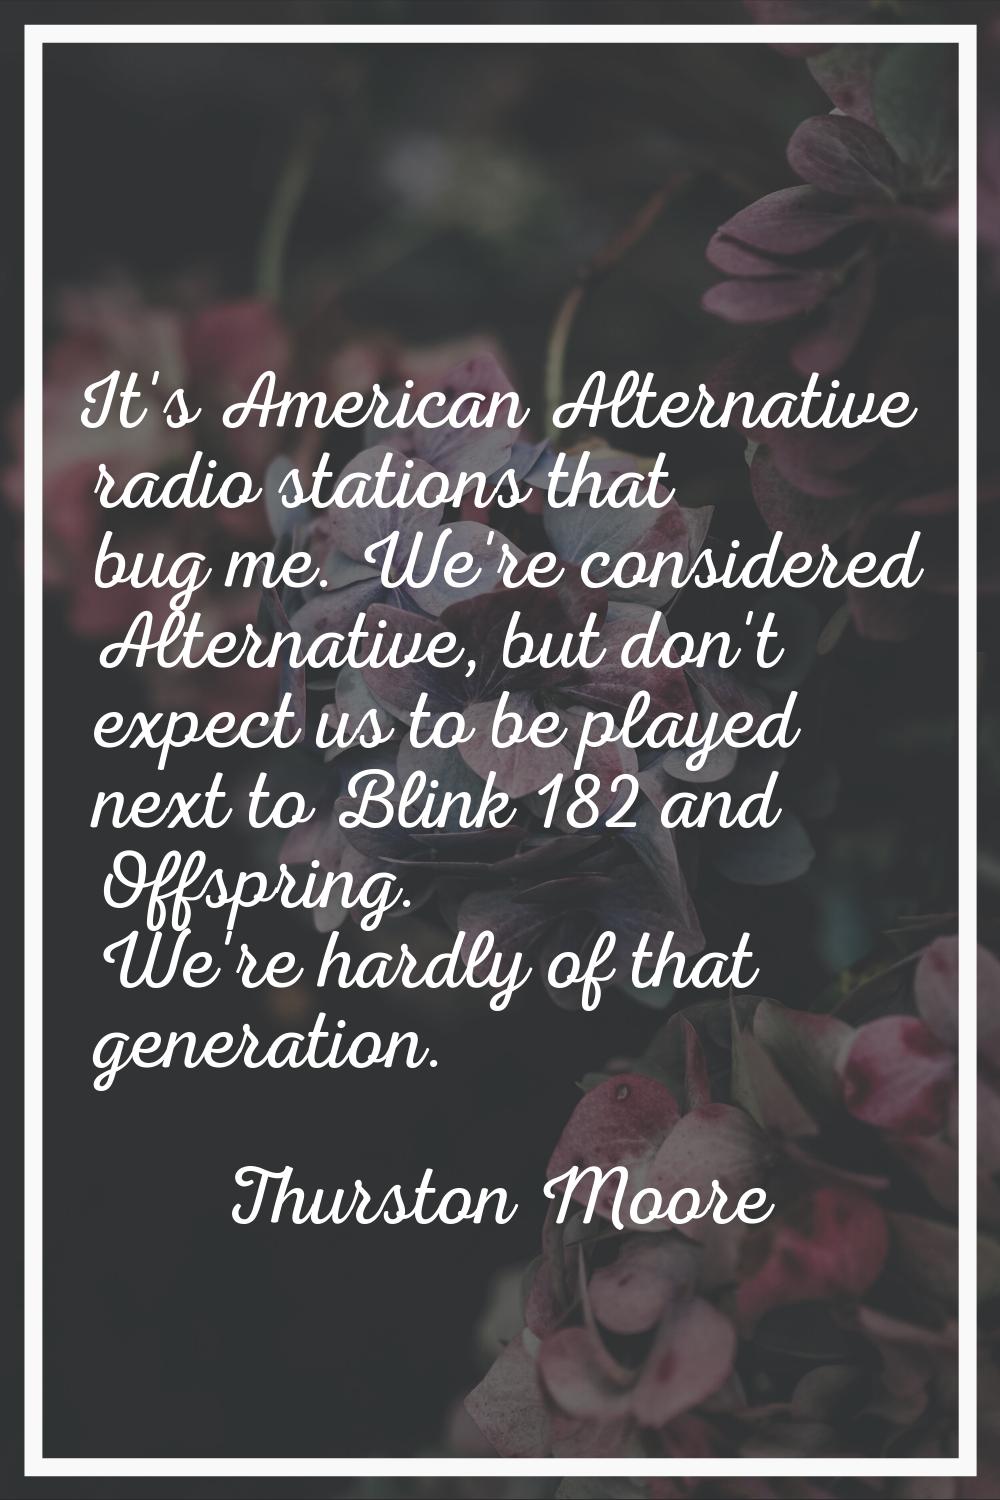 It's American Alternative radio stations that bug me. We're considered Alternative, but don't expec